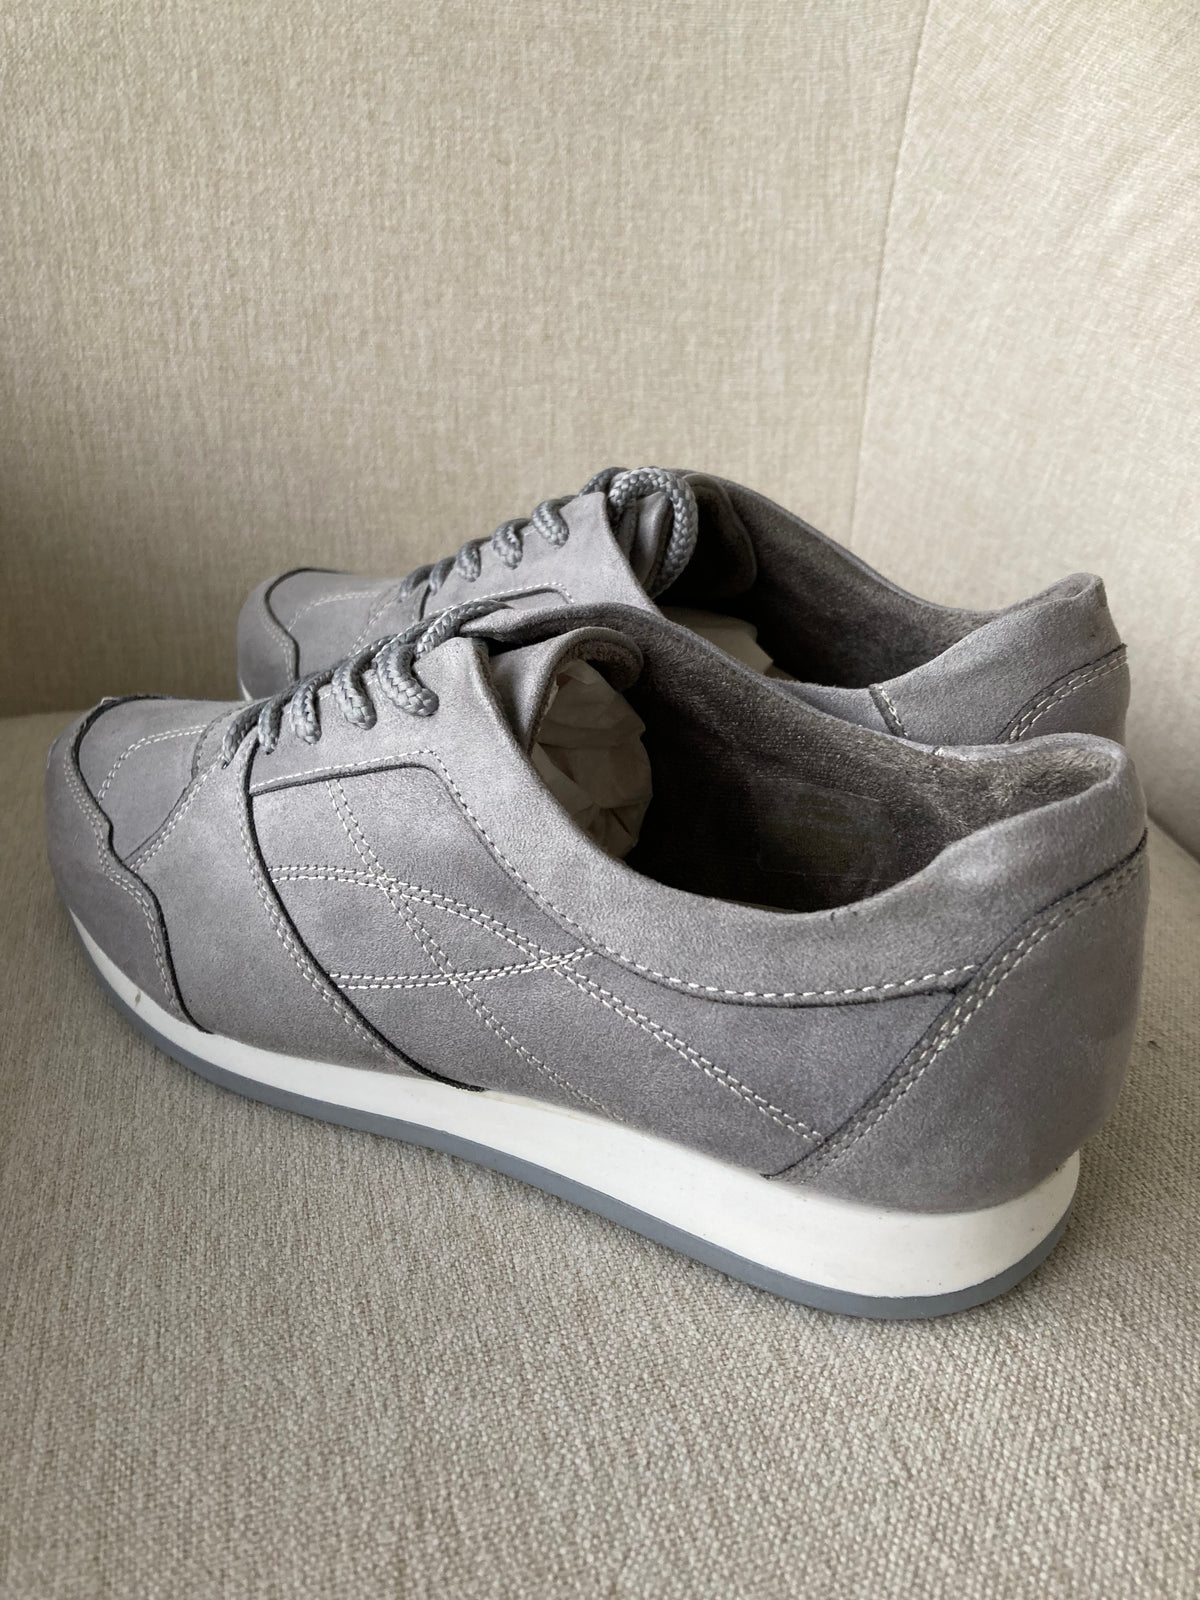 Grey Suede lace up trainers by AIRSOFT - Size 6